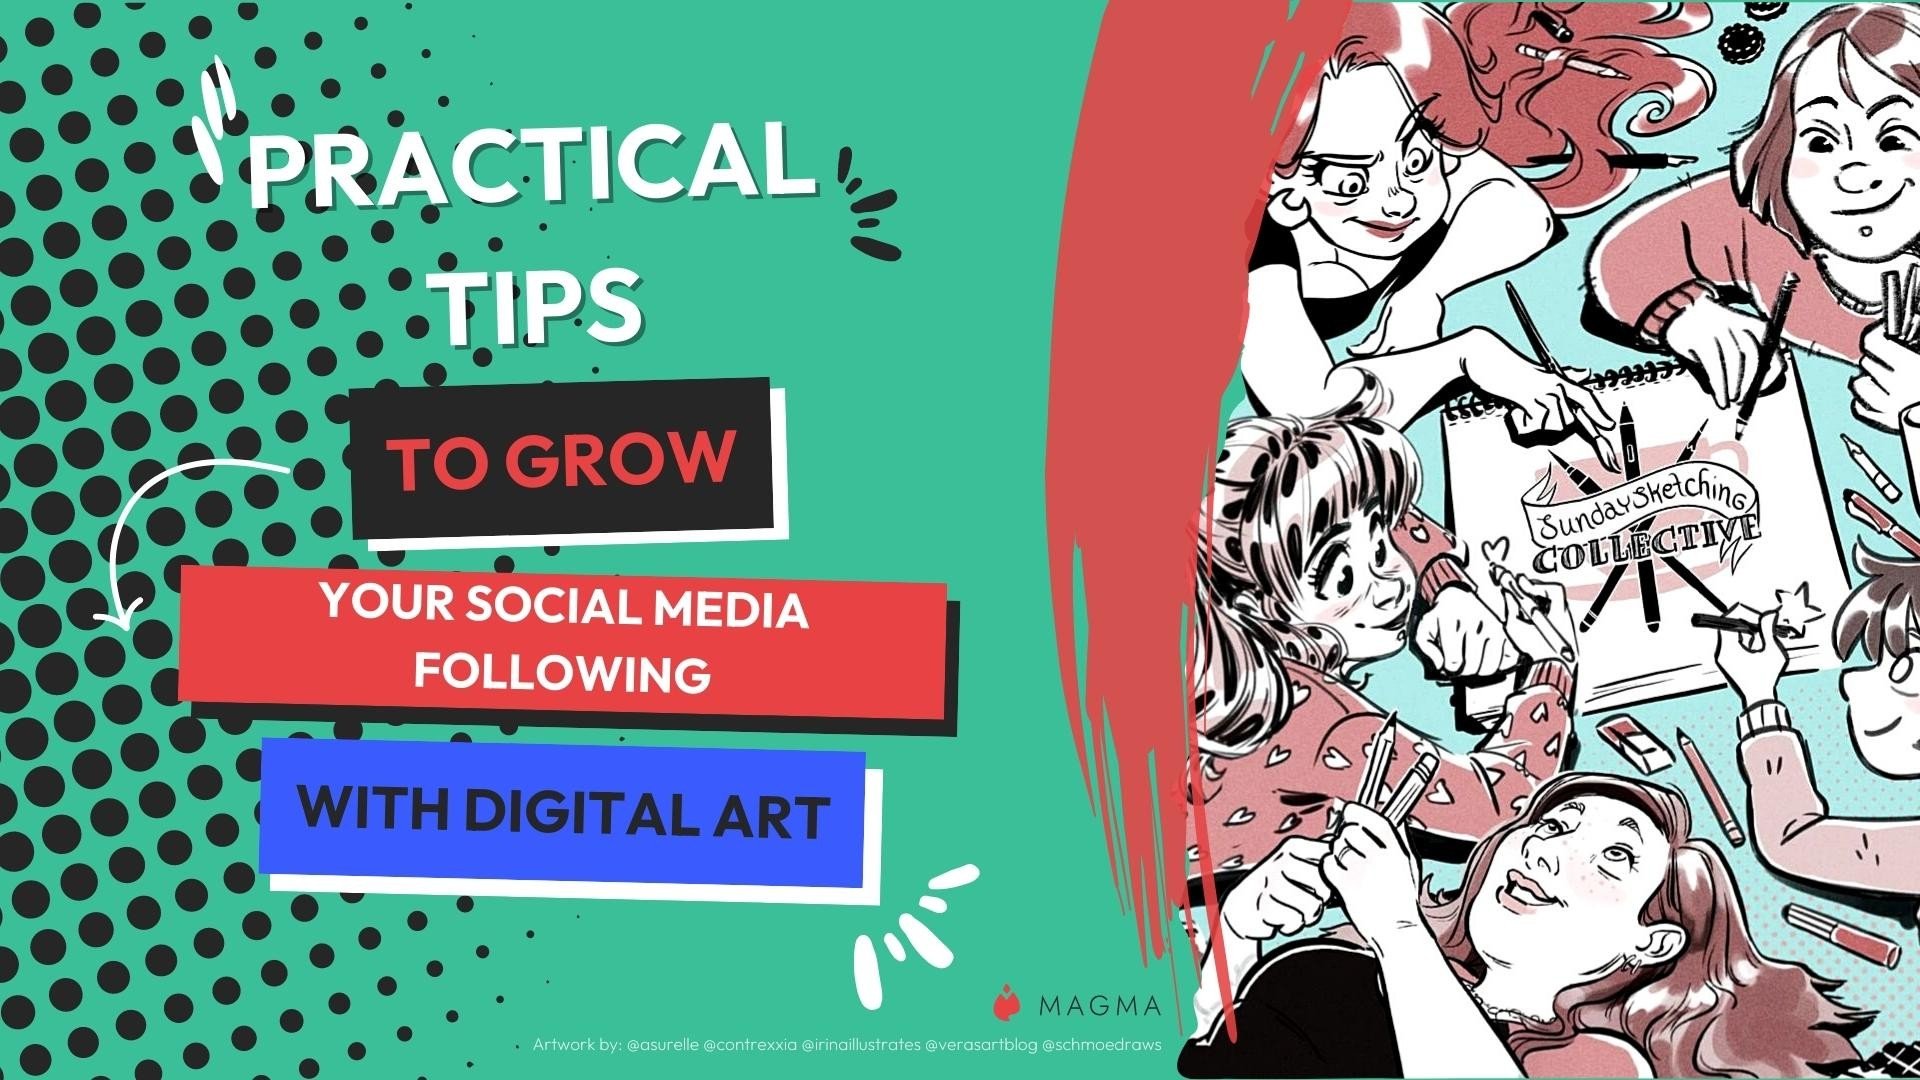 Practical tips to grow your social media following with digital art cover image